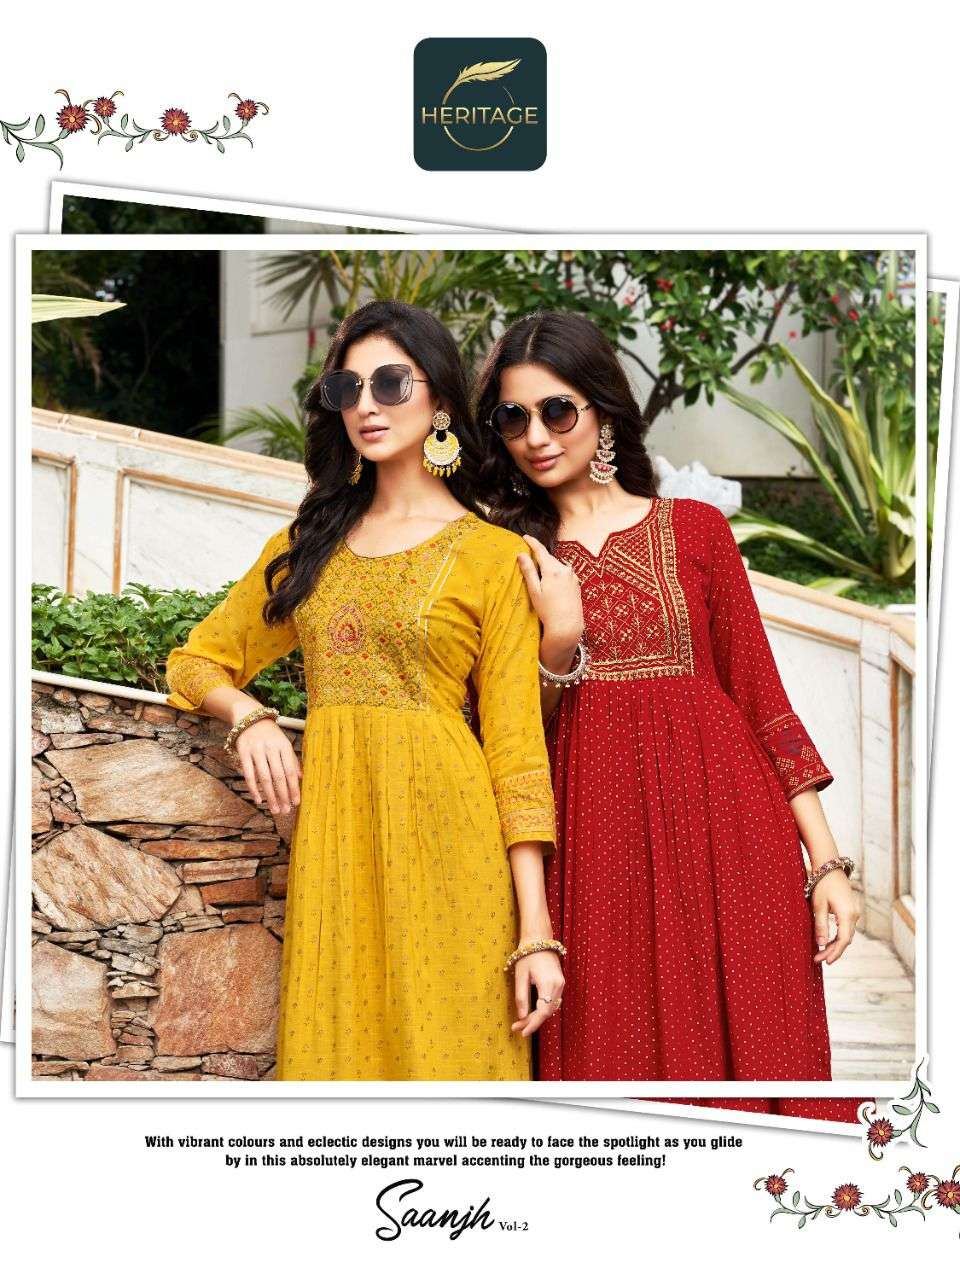 HERITAGE COLLECTION PRESENTS   SAANJH VOL-2